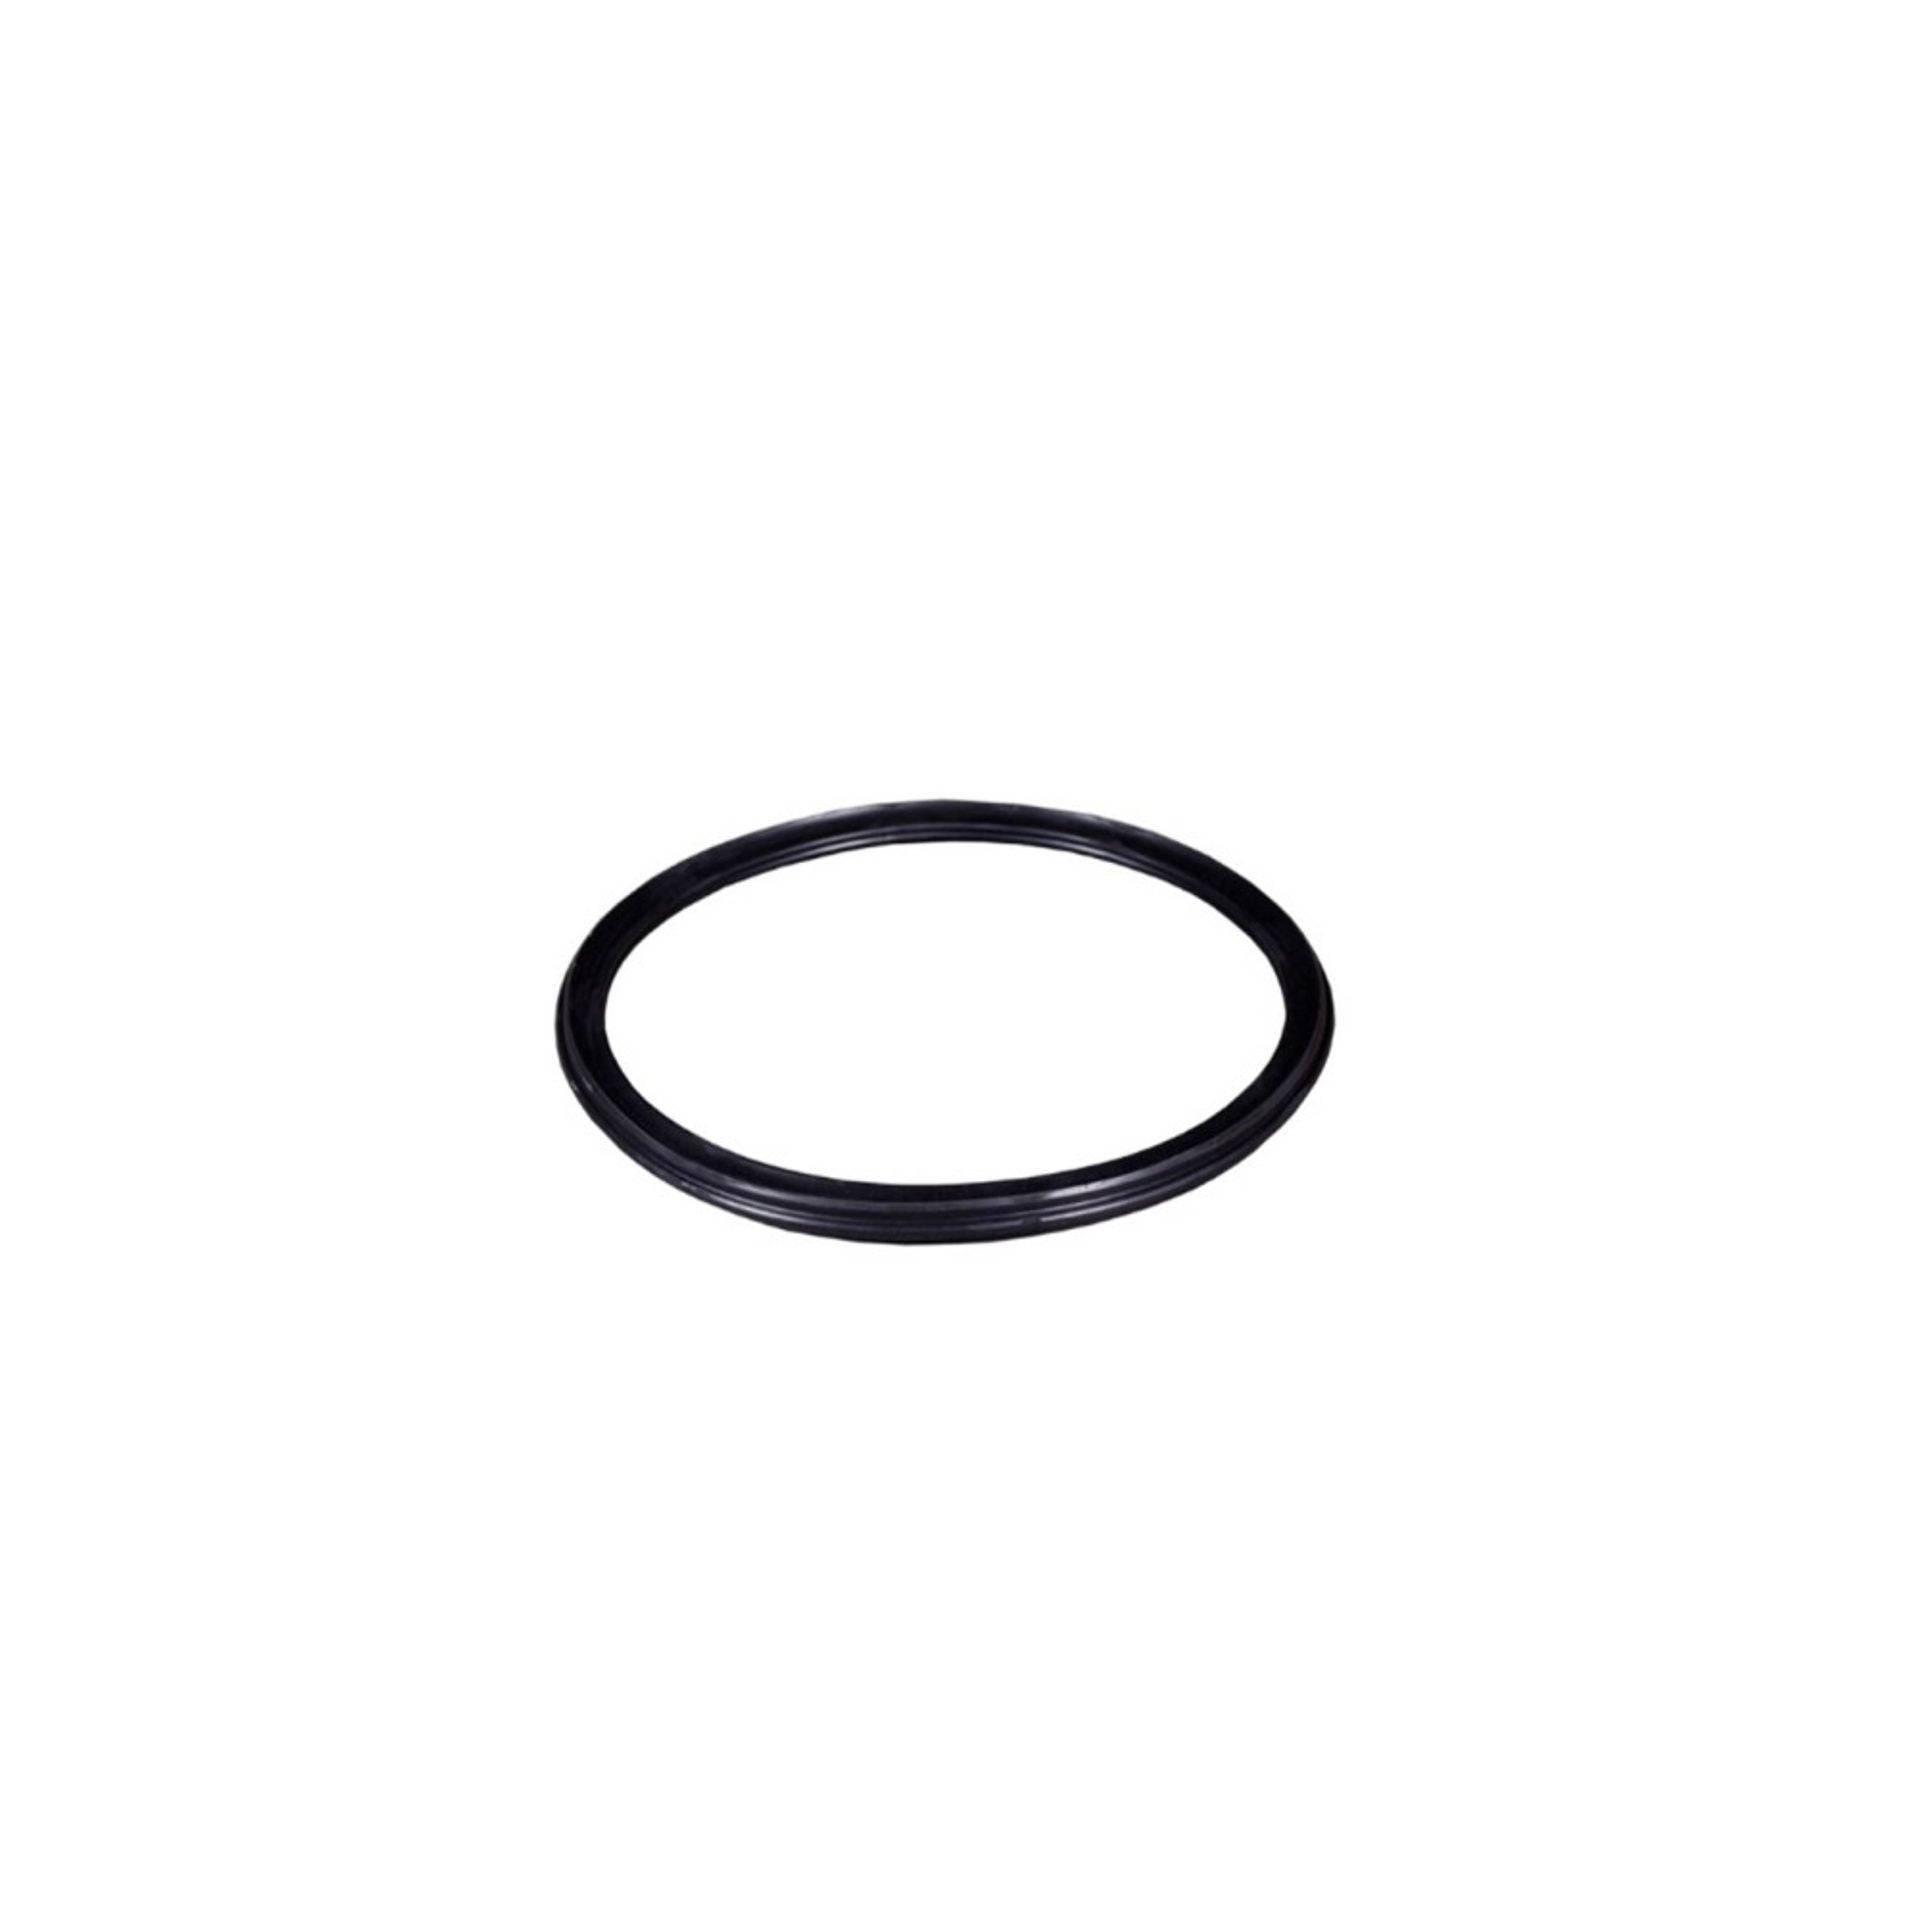 Rubber seal for Corrected Cable Pipe Kaczmarek